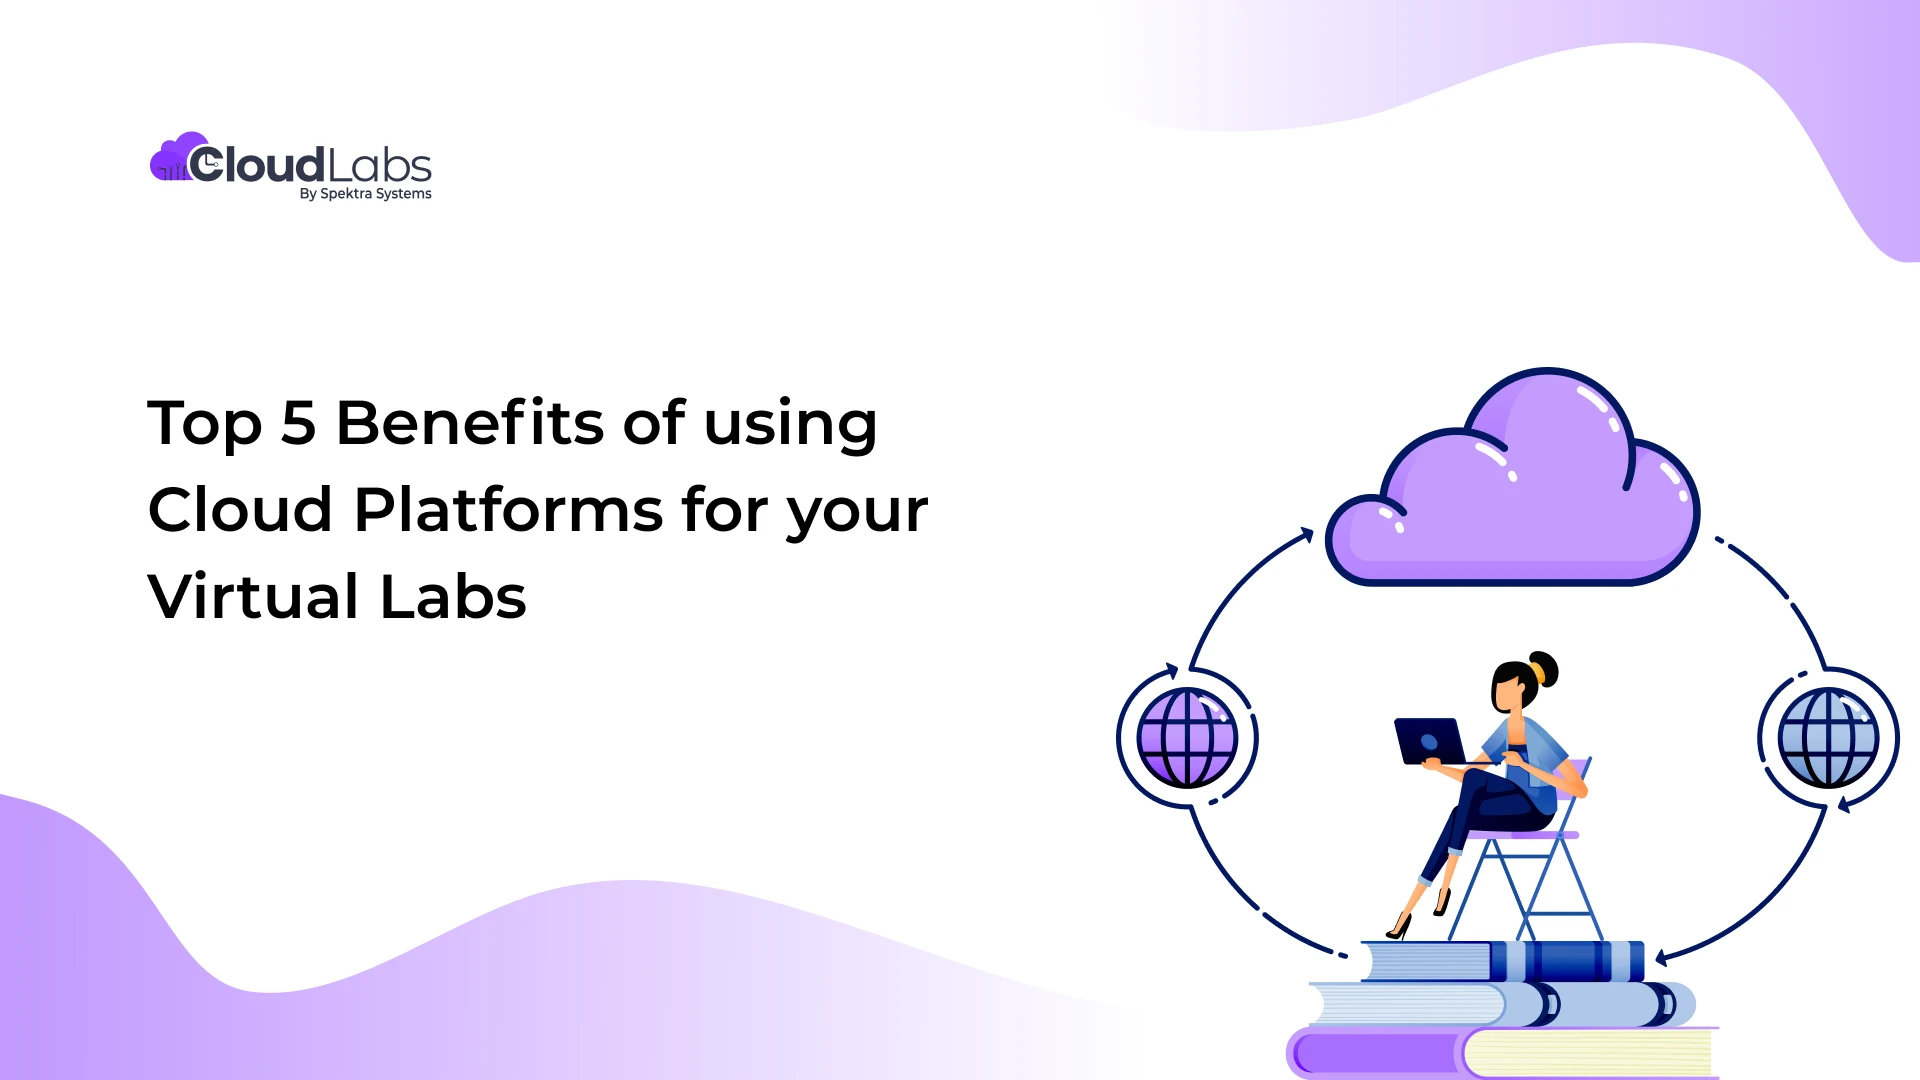 Top 5 Benefits of using Cloud Platforms for your Virtual Labs